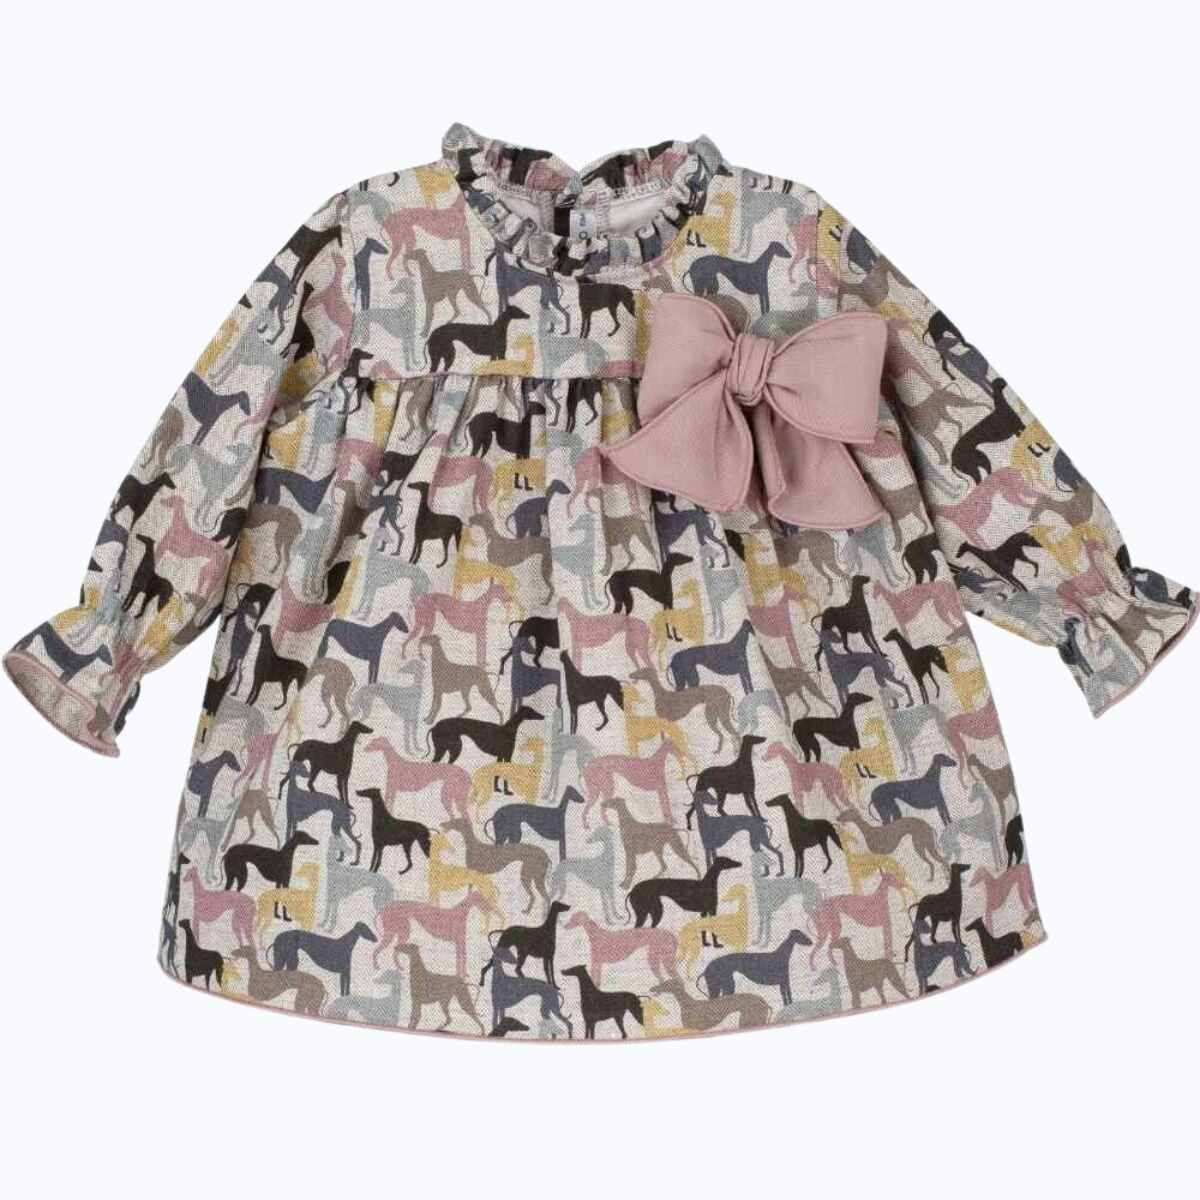 GRILS PUPPY PRINT FRILLED NECK DRESS WITH BIG BOW CALAMARO - 1